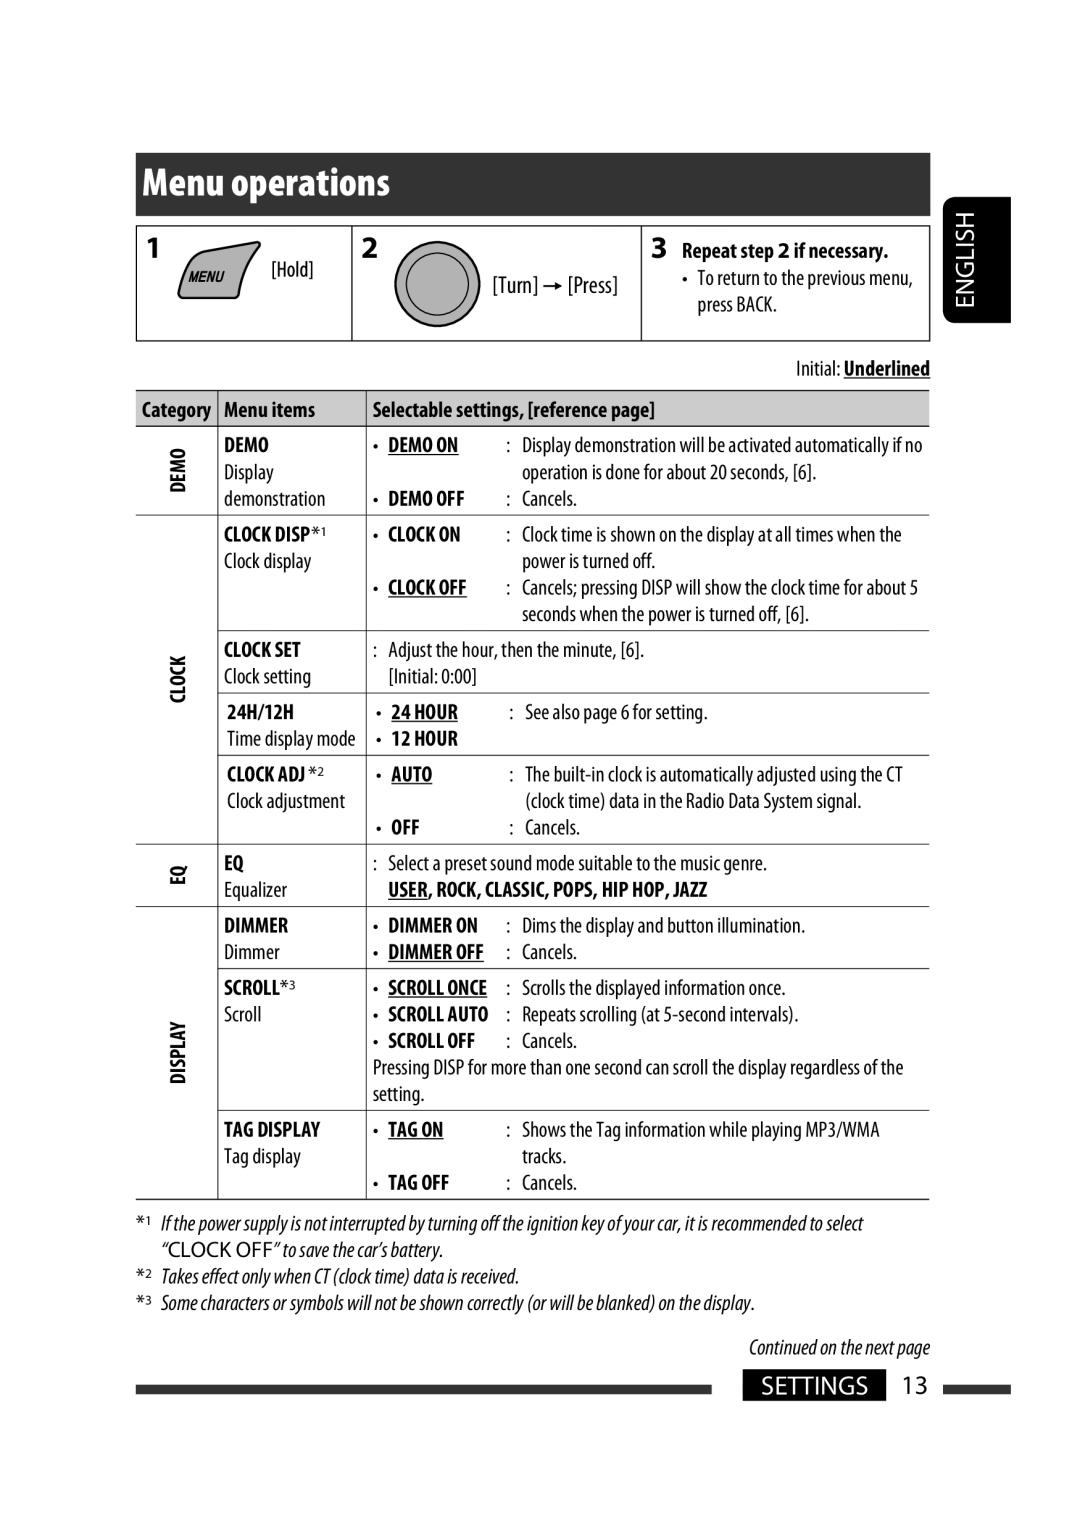 JVC KD-R302, KD-R303, KD-R301 manual Menu operations, English, Settings, Continued on the next page, demonstration 